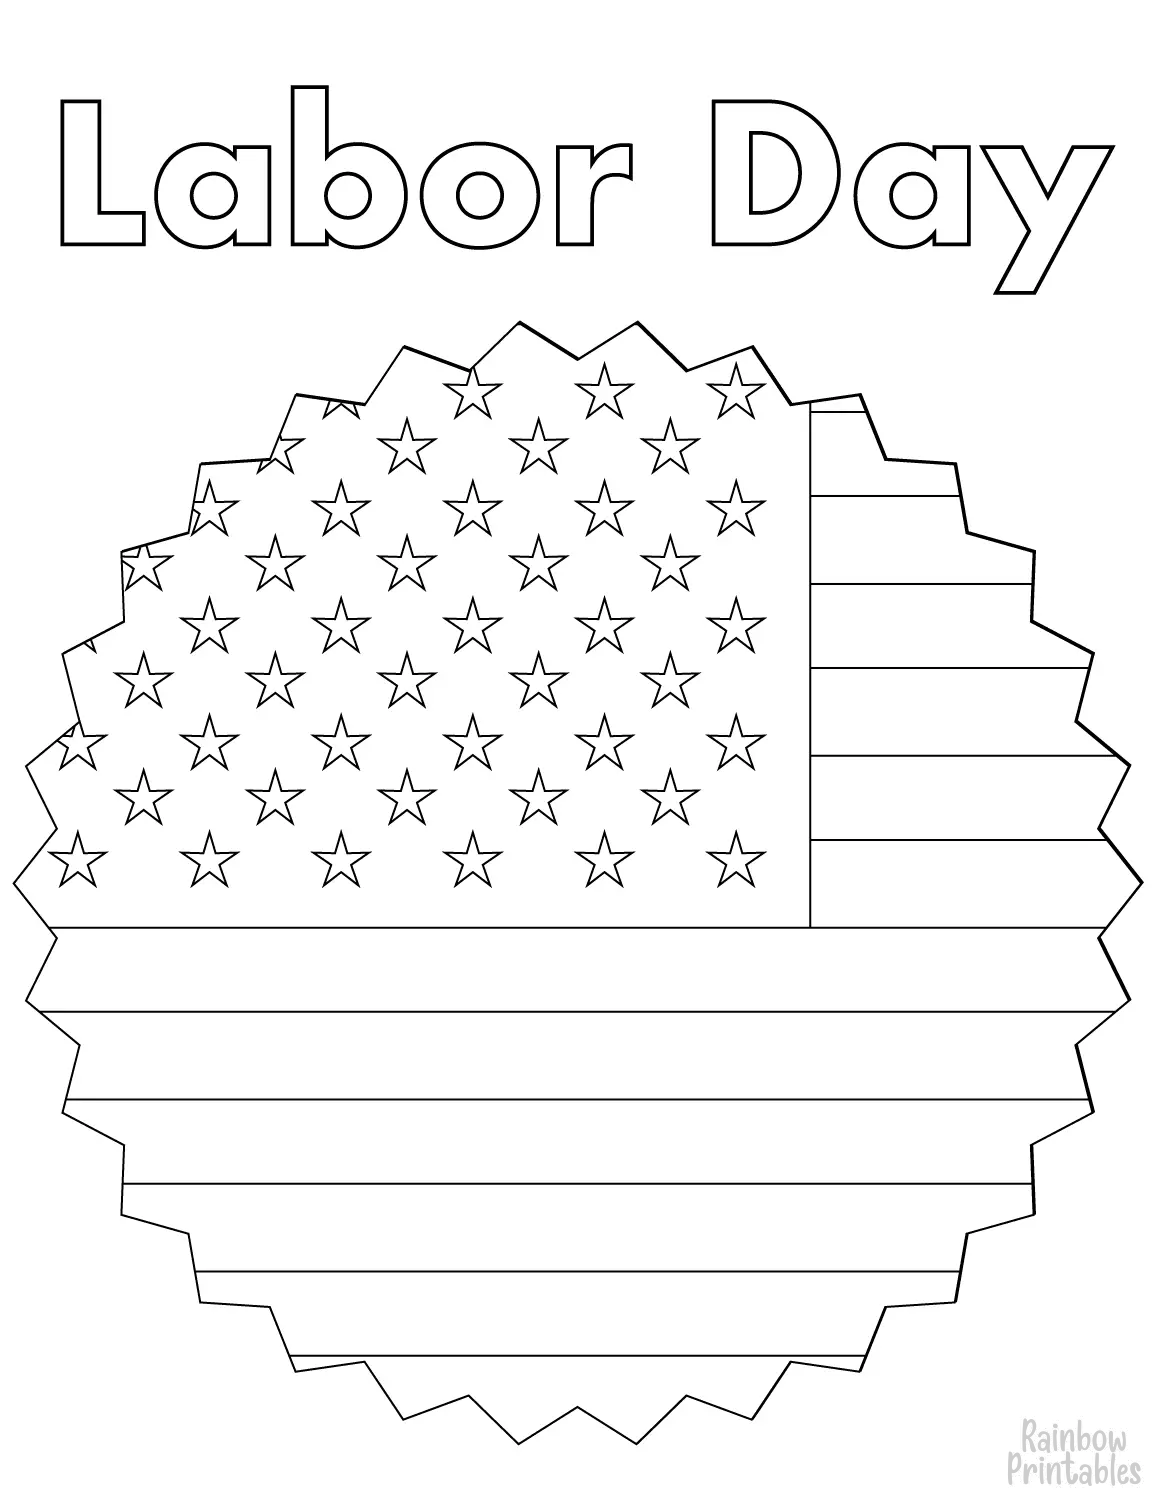 Roundel USA AMERICAN HOLIDAY LABOR DAY Clipart Coloring Pages Line Art Drawings for Kids-